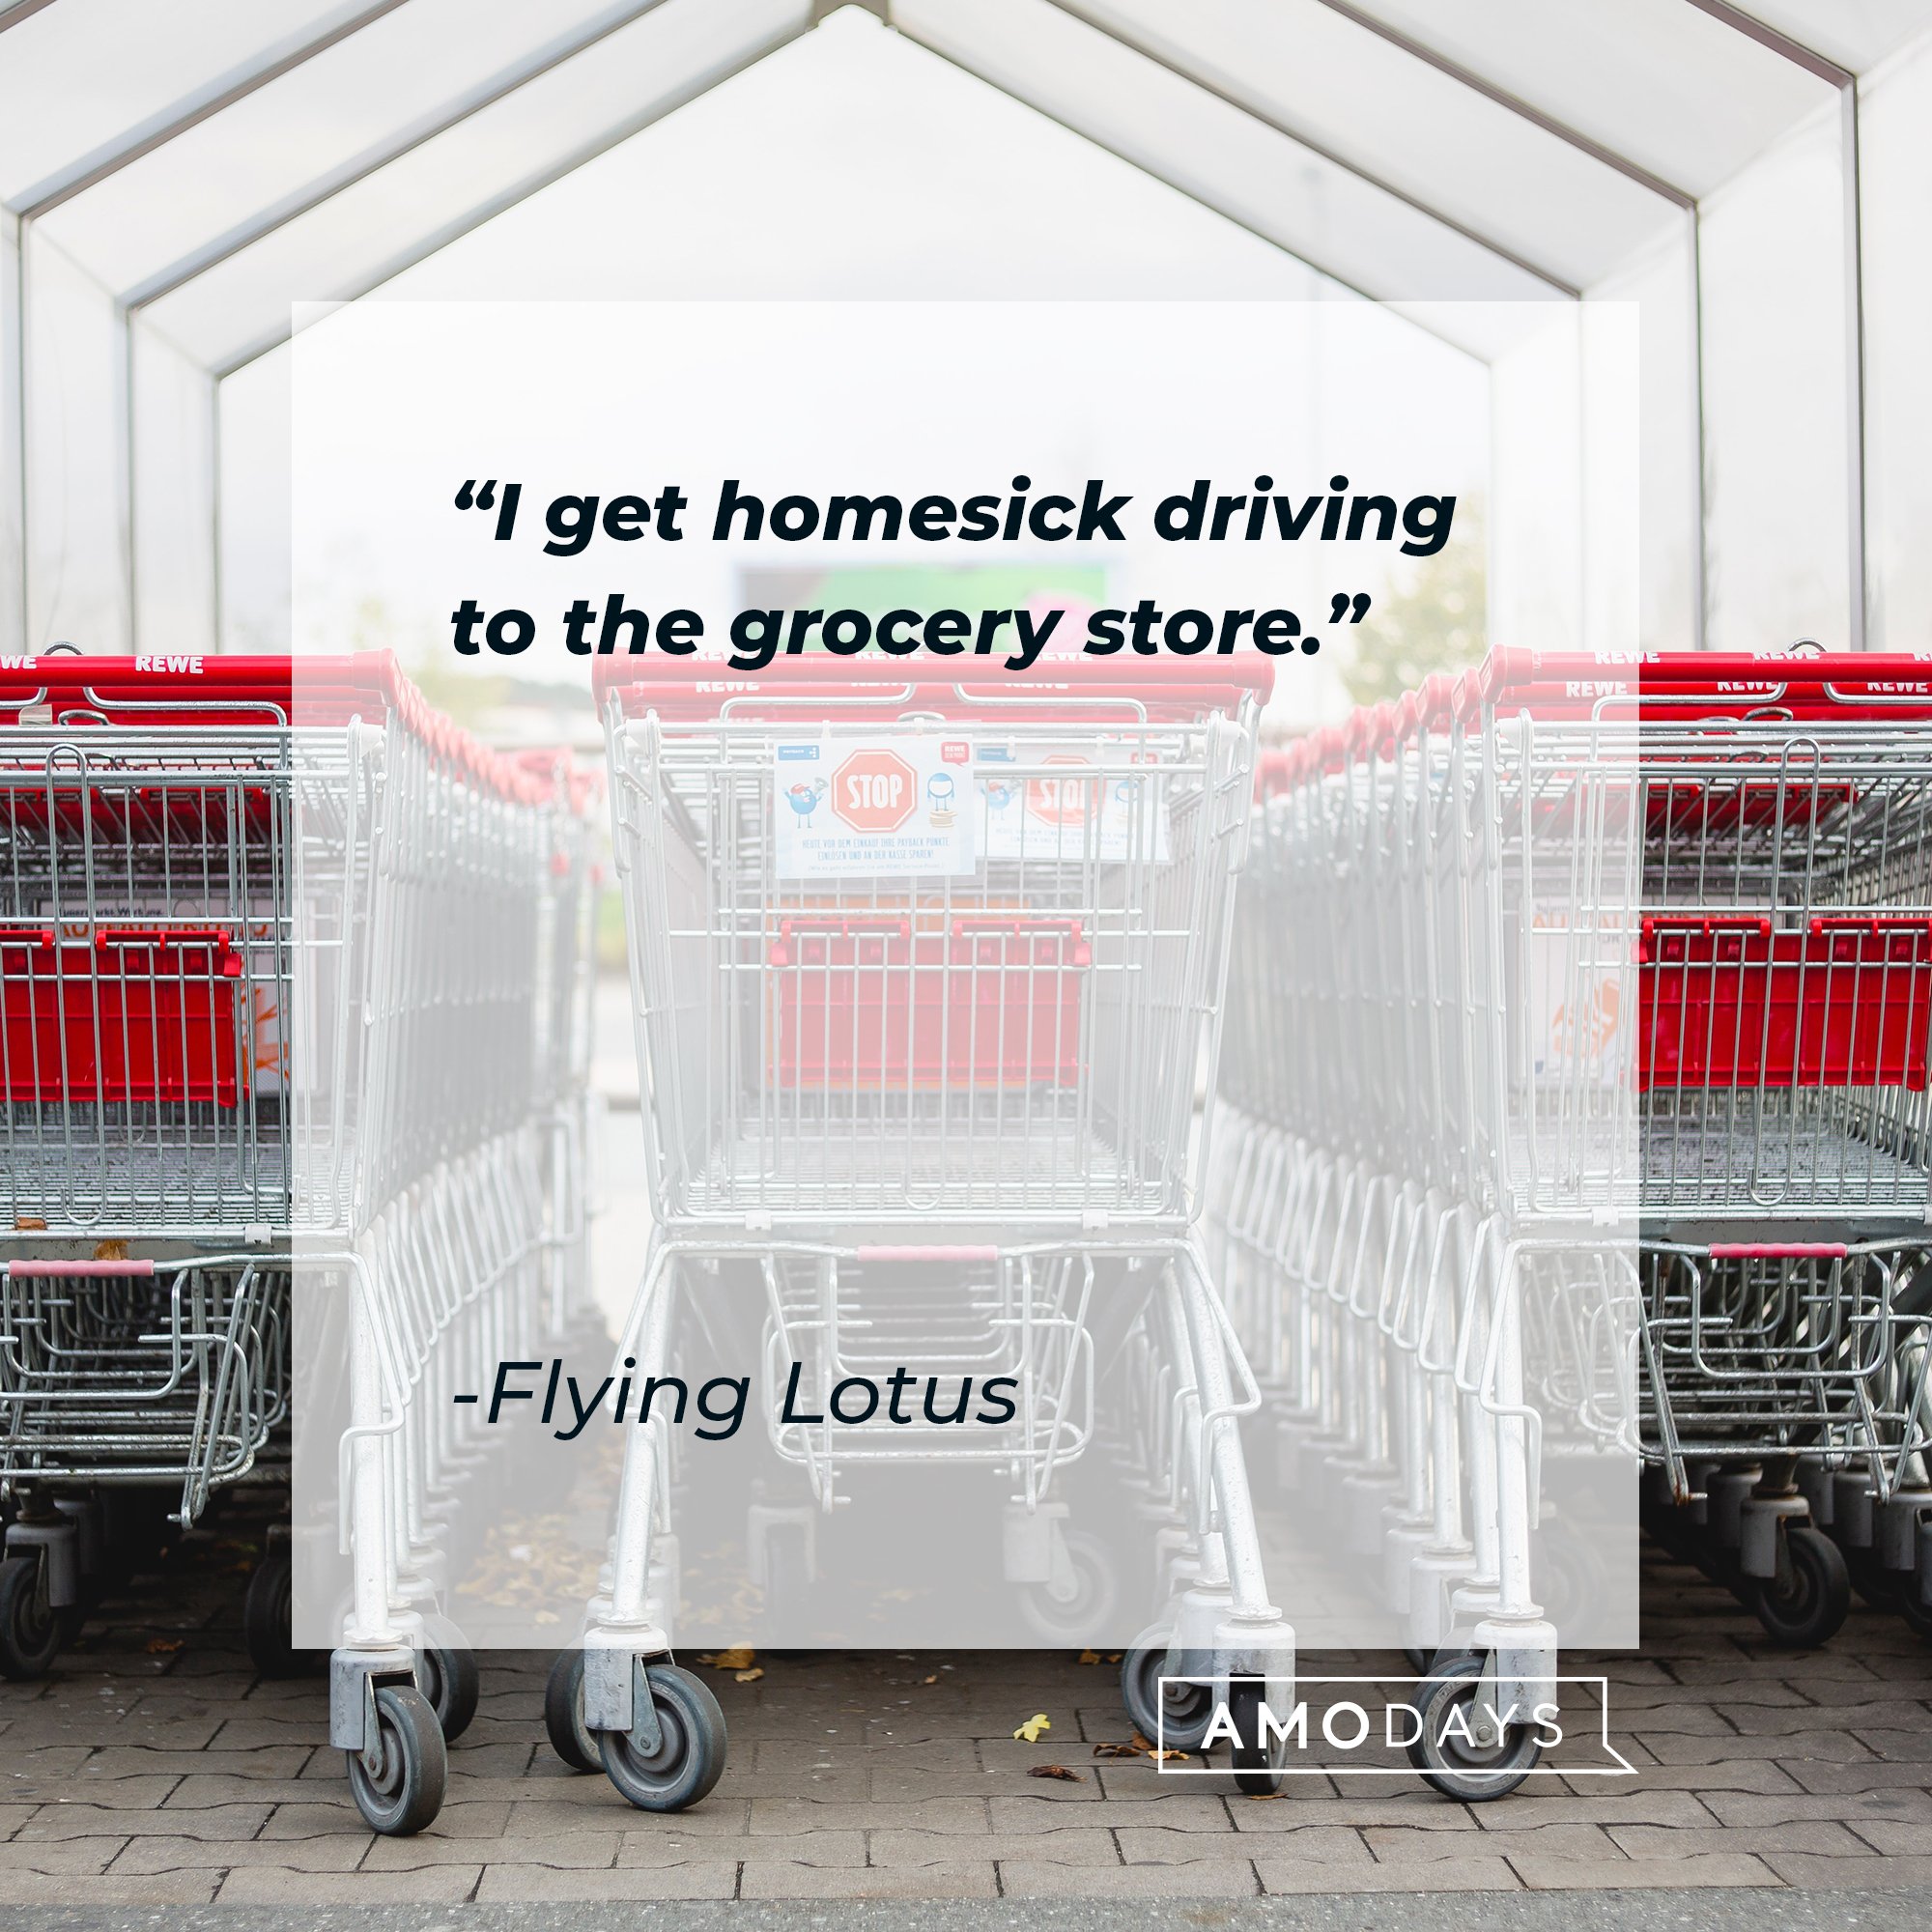 Flying Lotus' quote: "I get homesick driving to the grocery store." | Image: AmoDays